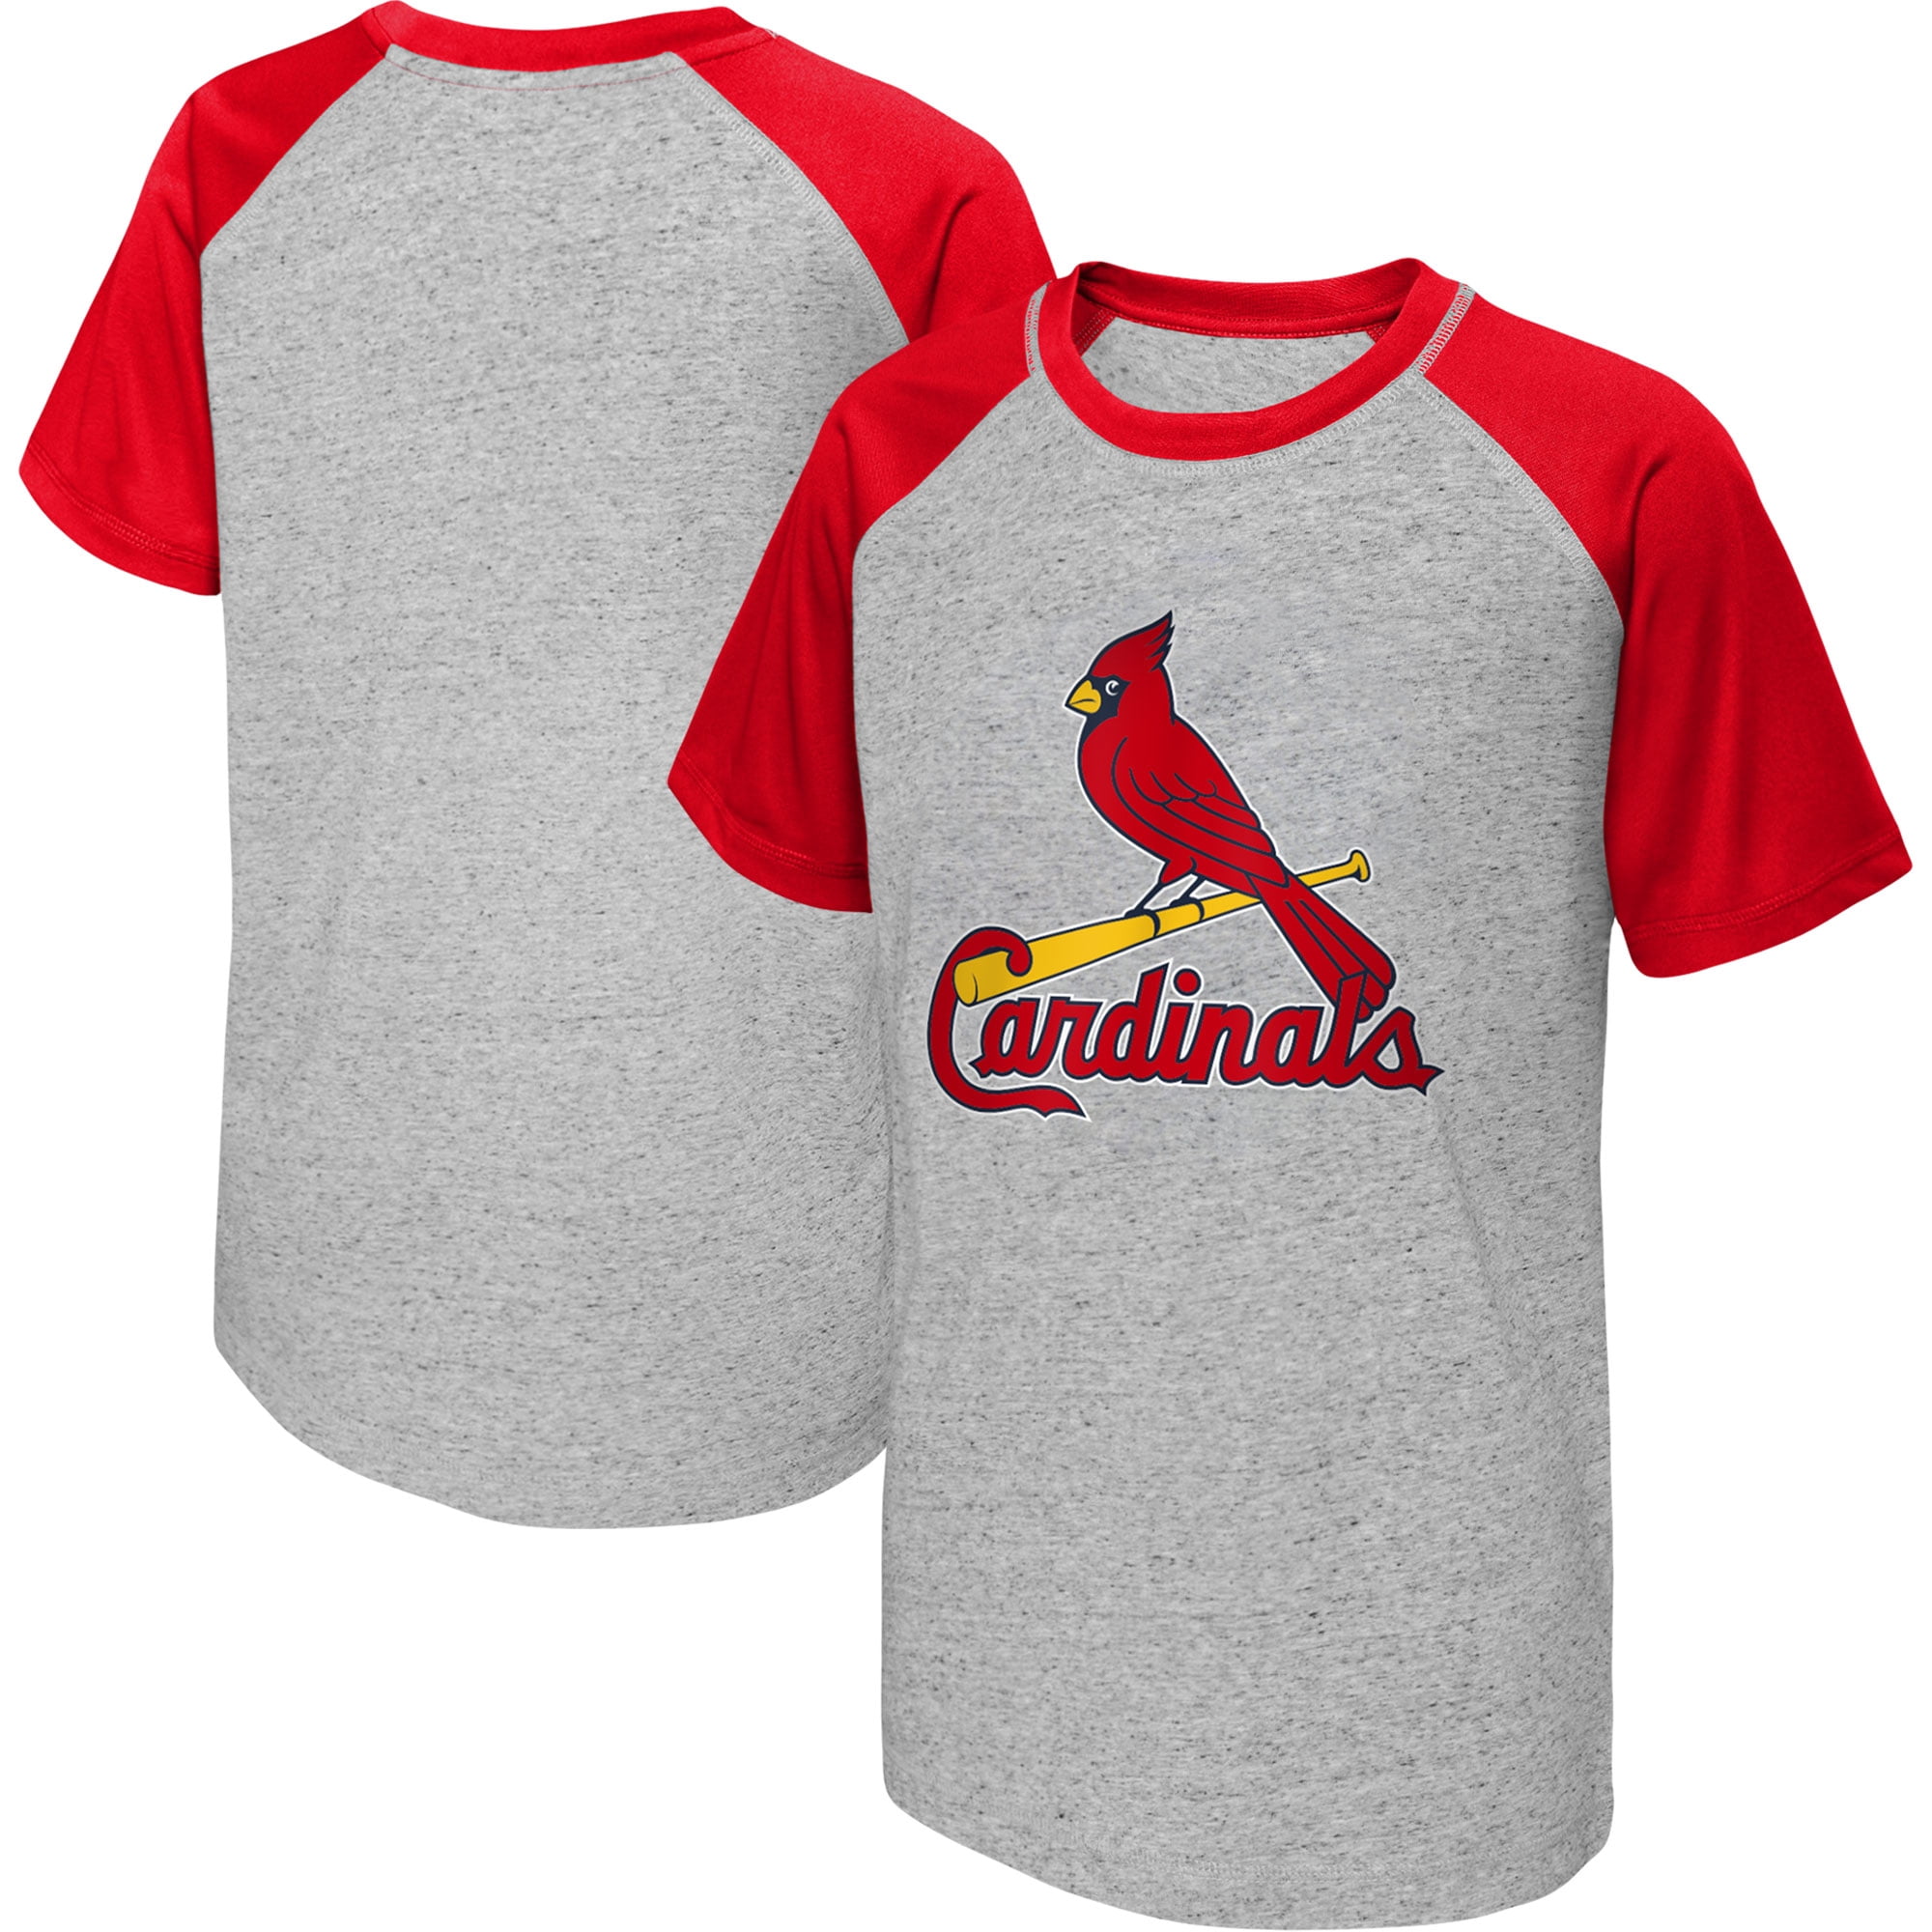 Youth MLB Productions Heather Gray and Red St. Louis Cardinals MBSG T-Shirt  